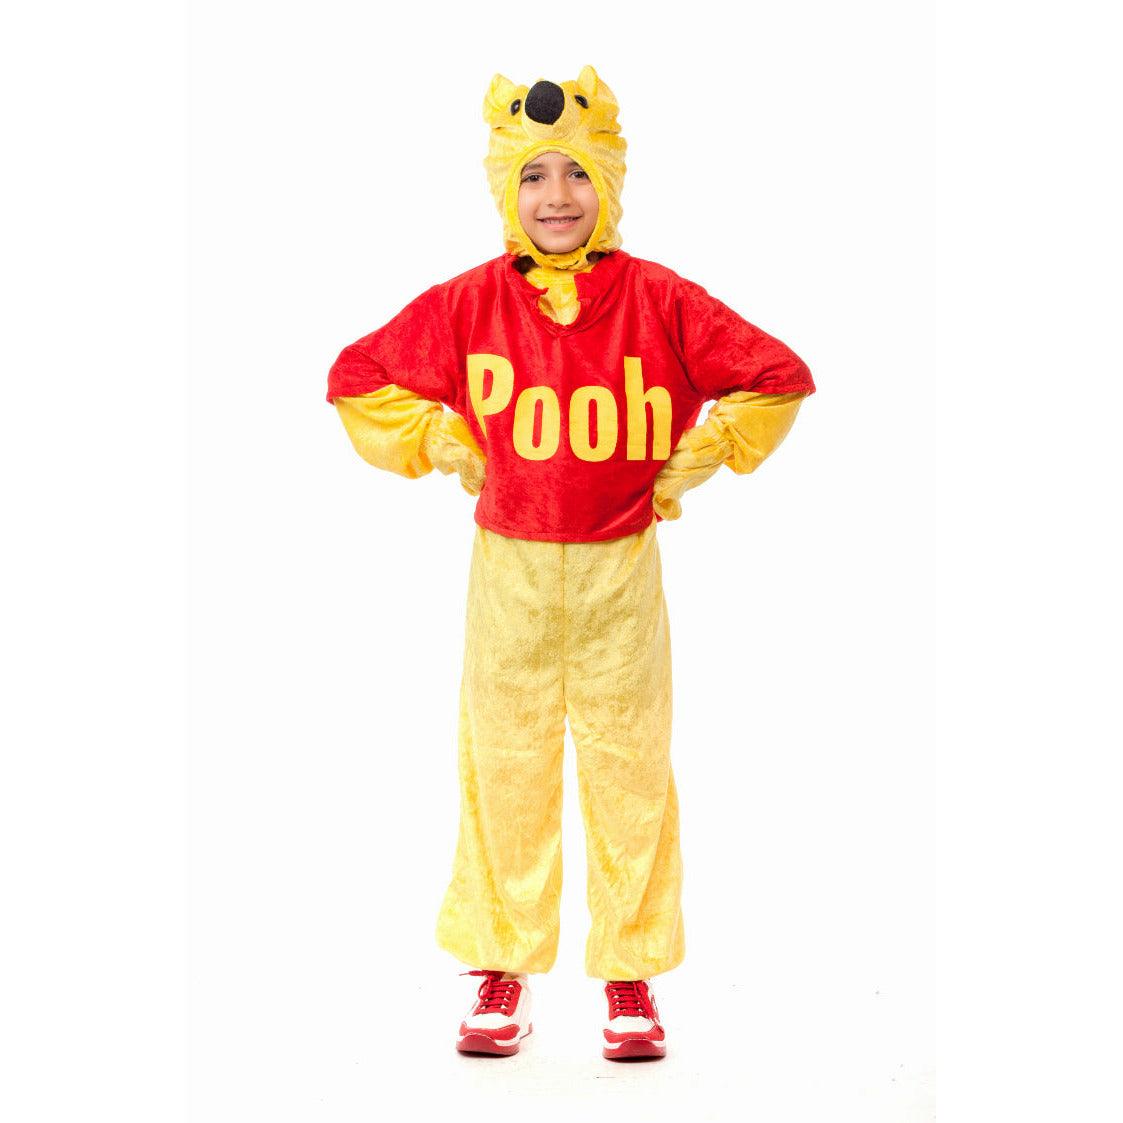 Winnie The Pooh Costume - Ourkids - M&A